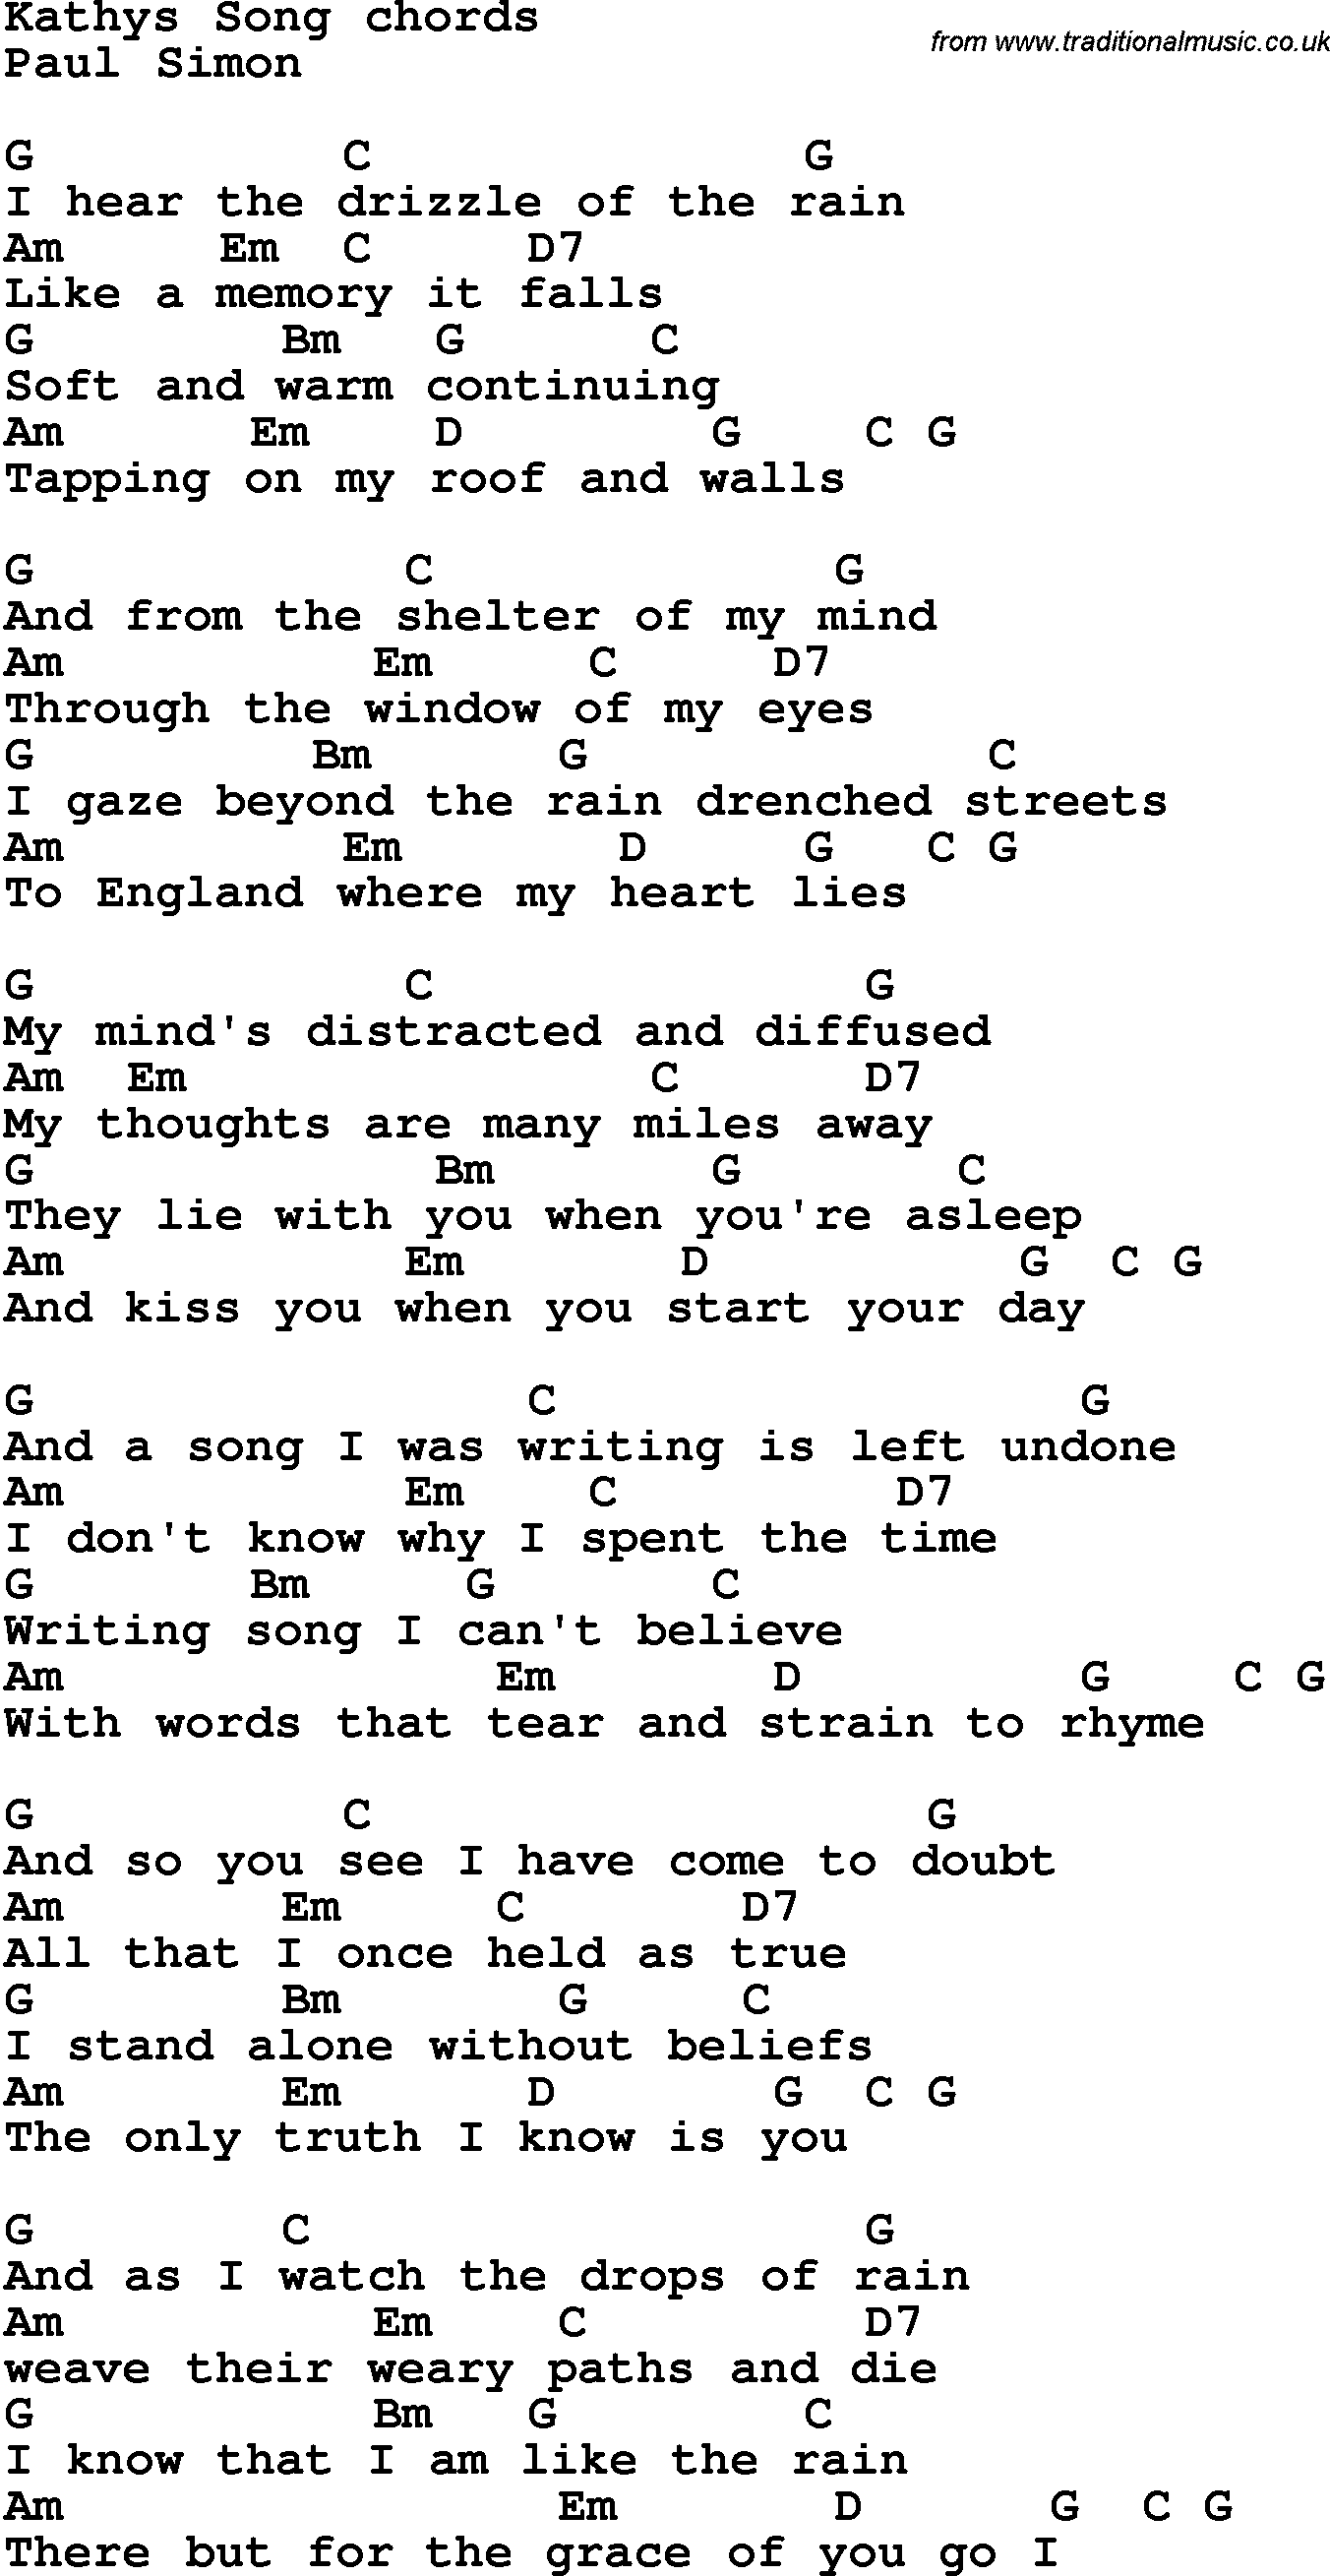 Song Lyrics with guitar chords for Kathy's Song